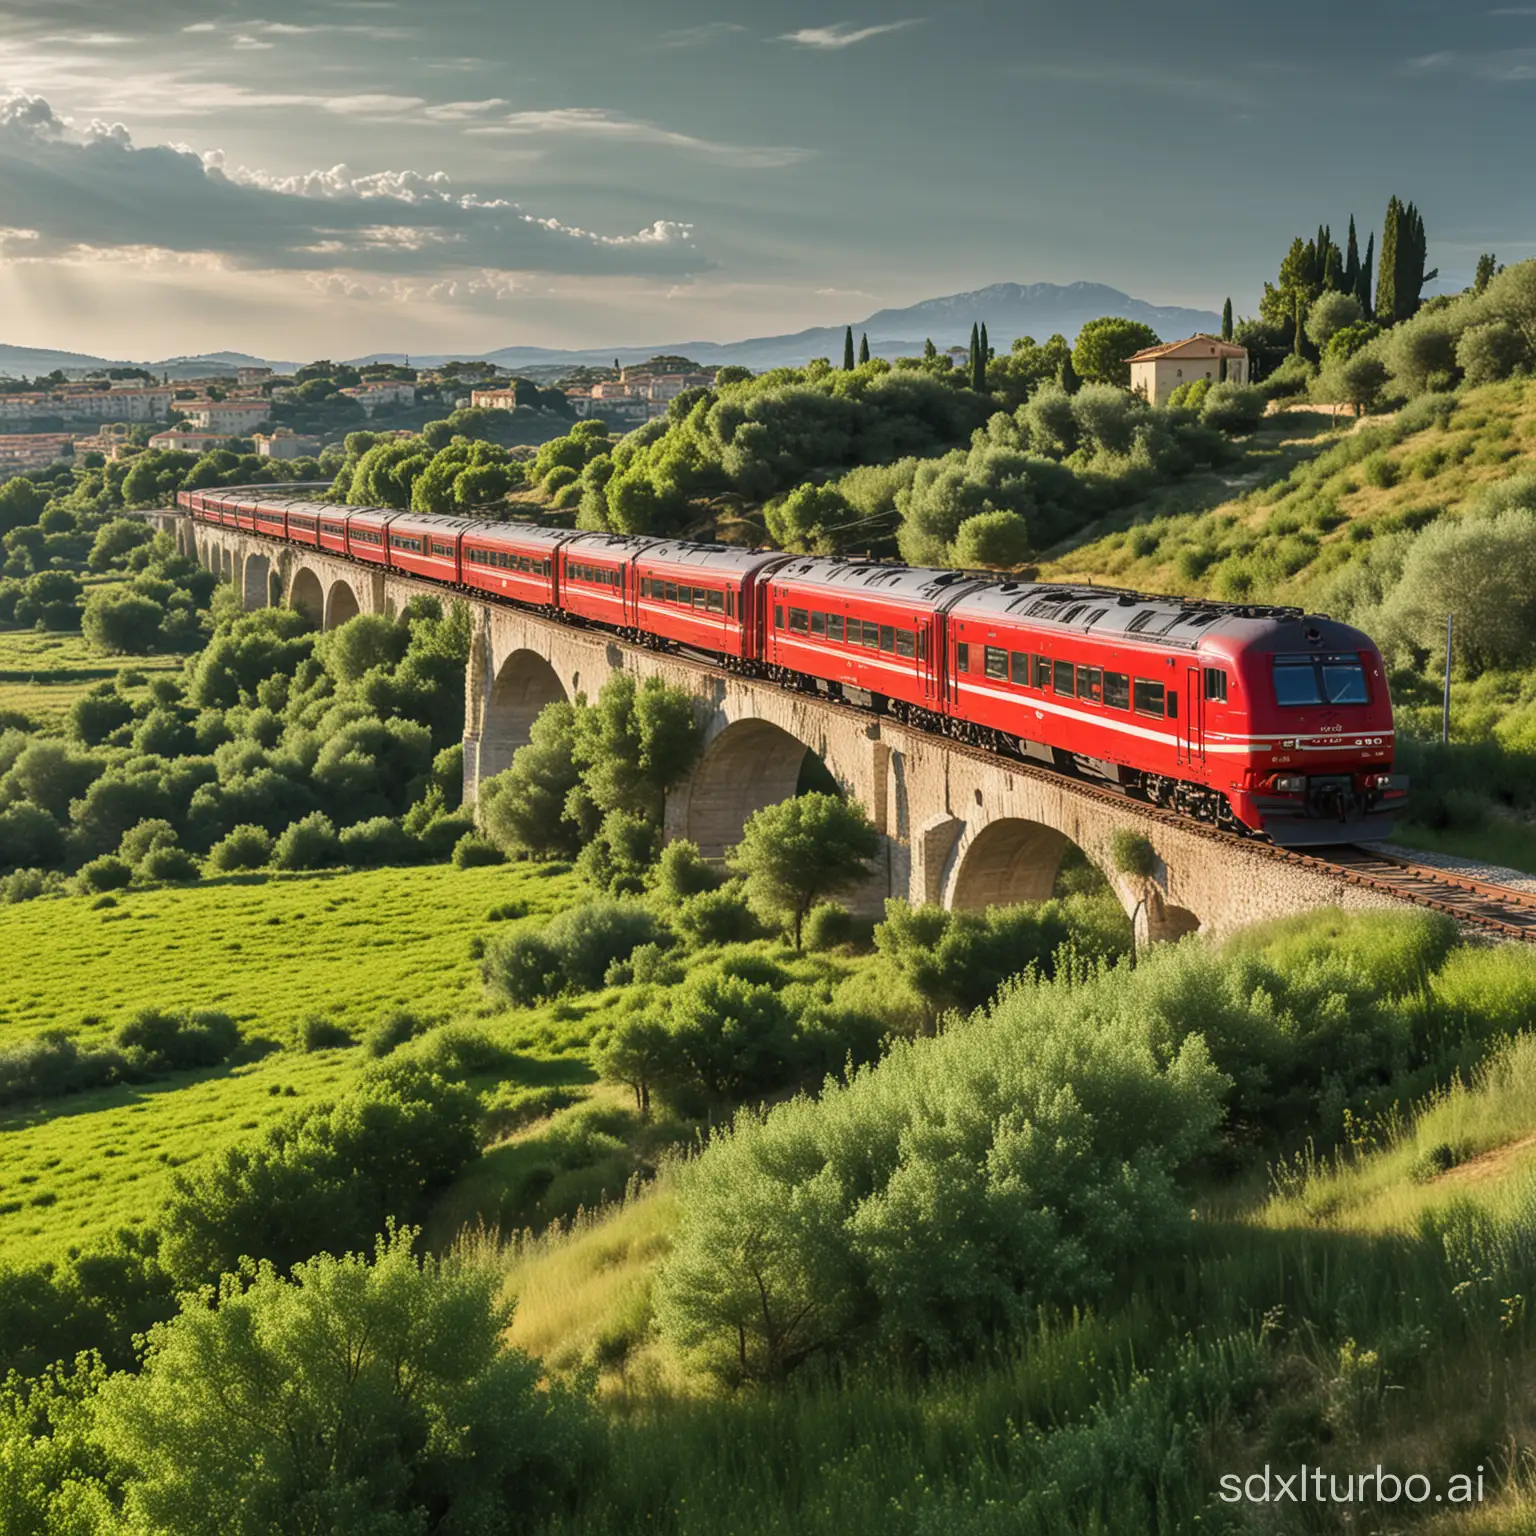 Vibrant-Red-Train-Rolling-Through-Lush-Green-Landscape-Illustration-with-Stunning-Lighting